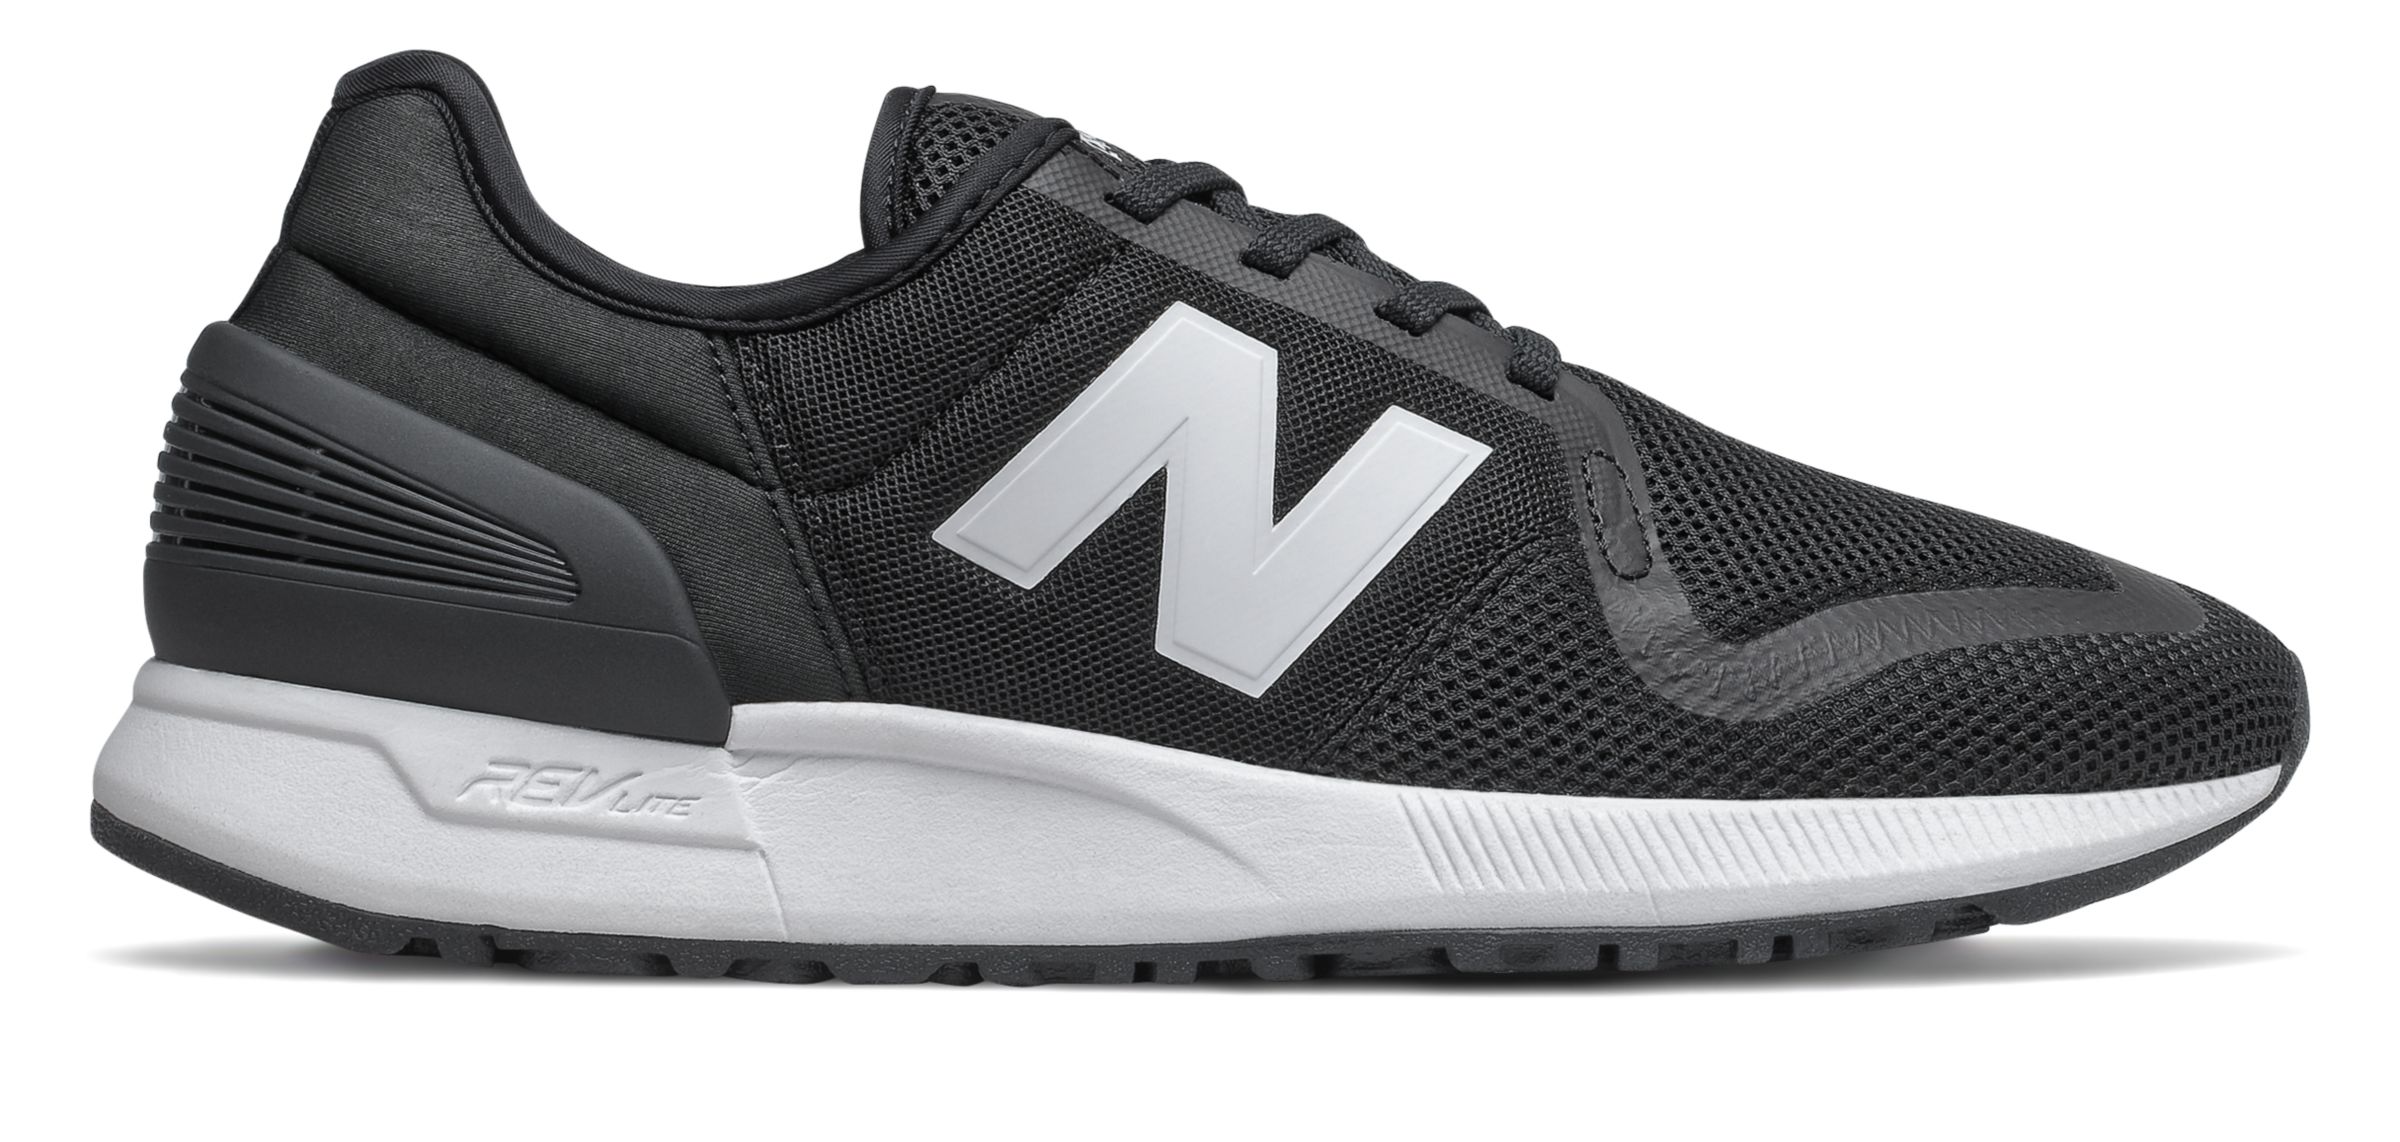 shoes by new balance